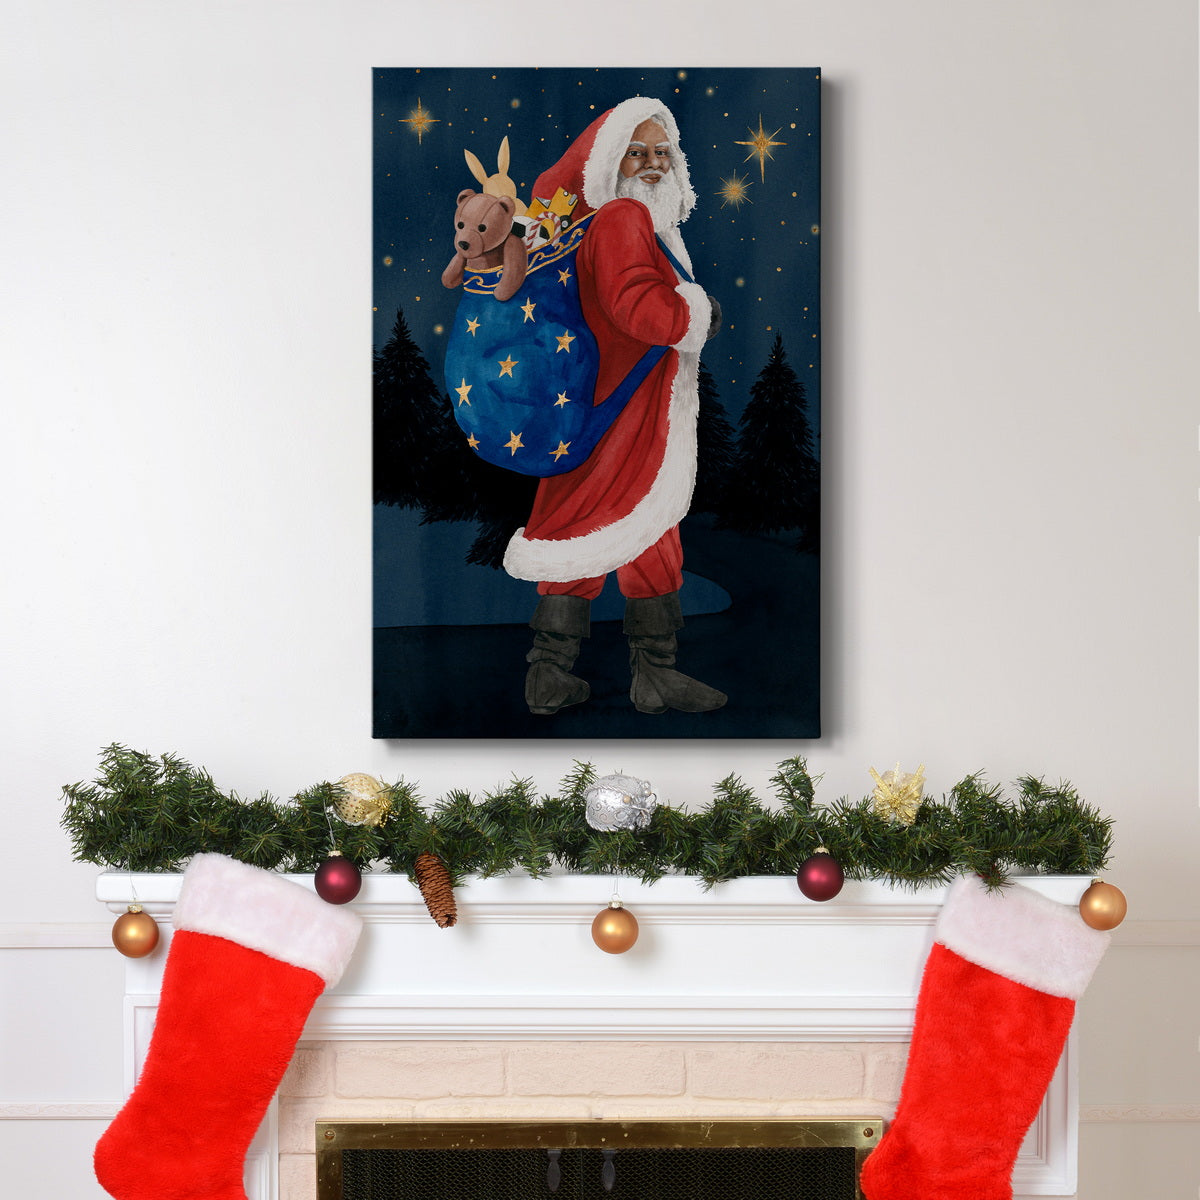 Celestial Christmas Collection B - Gallery Wrapped Canvas